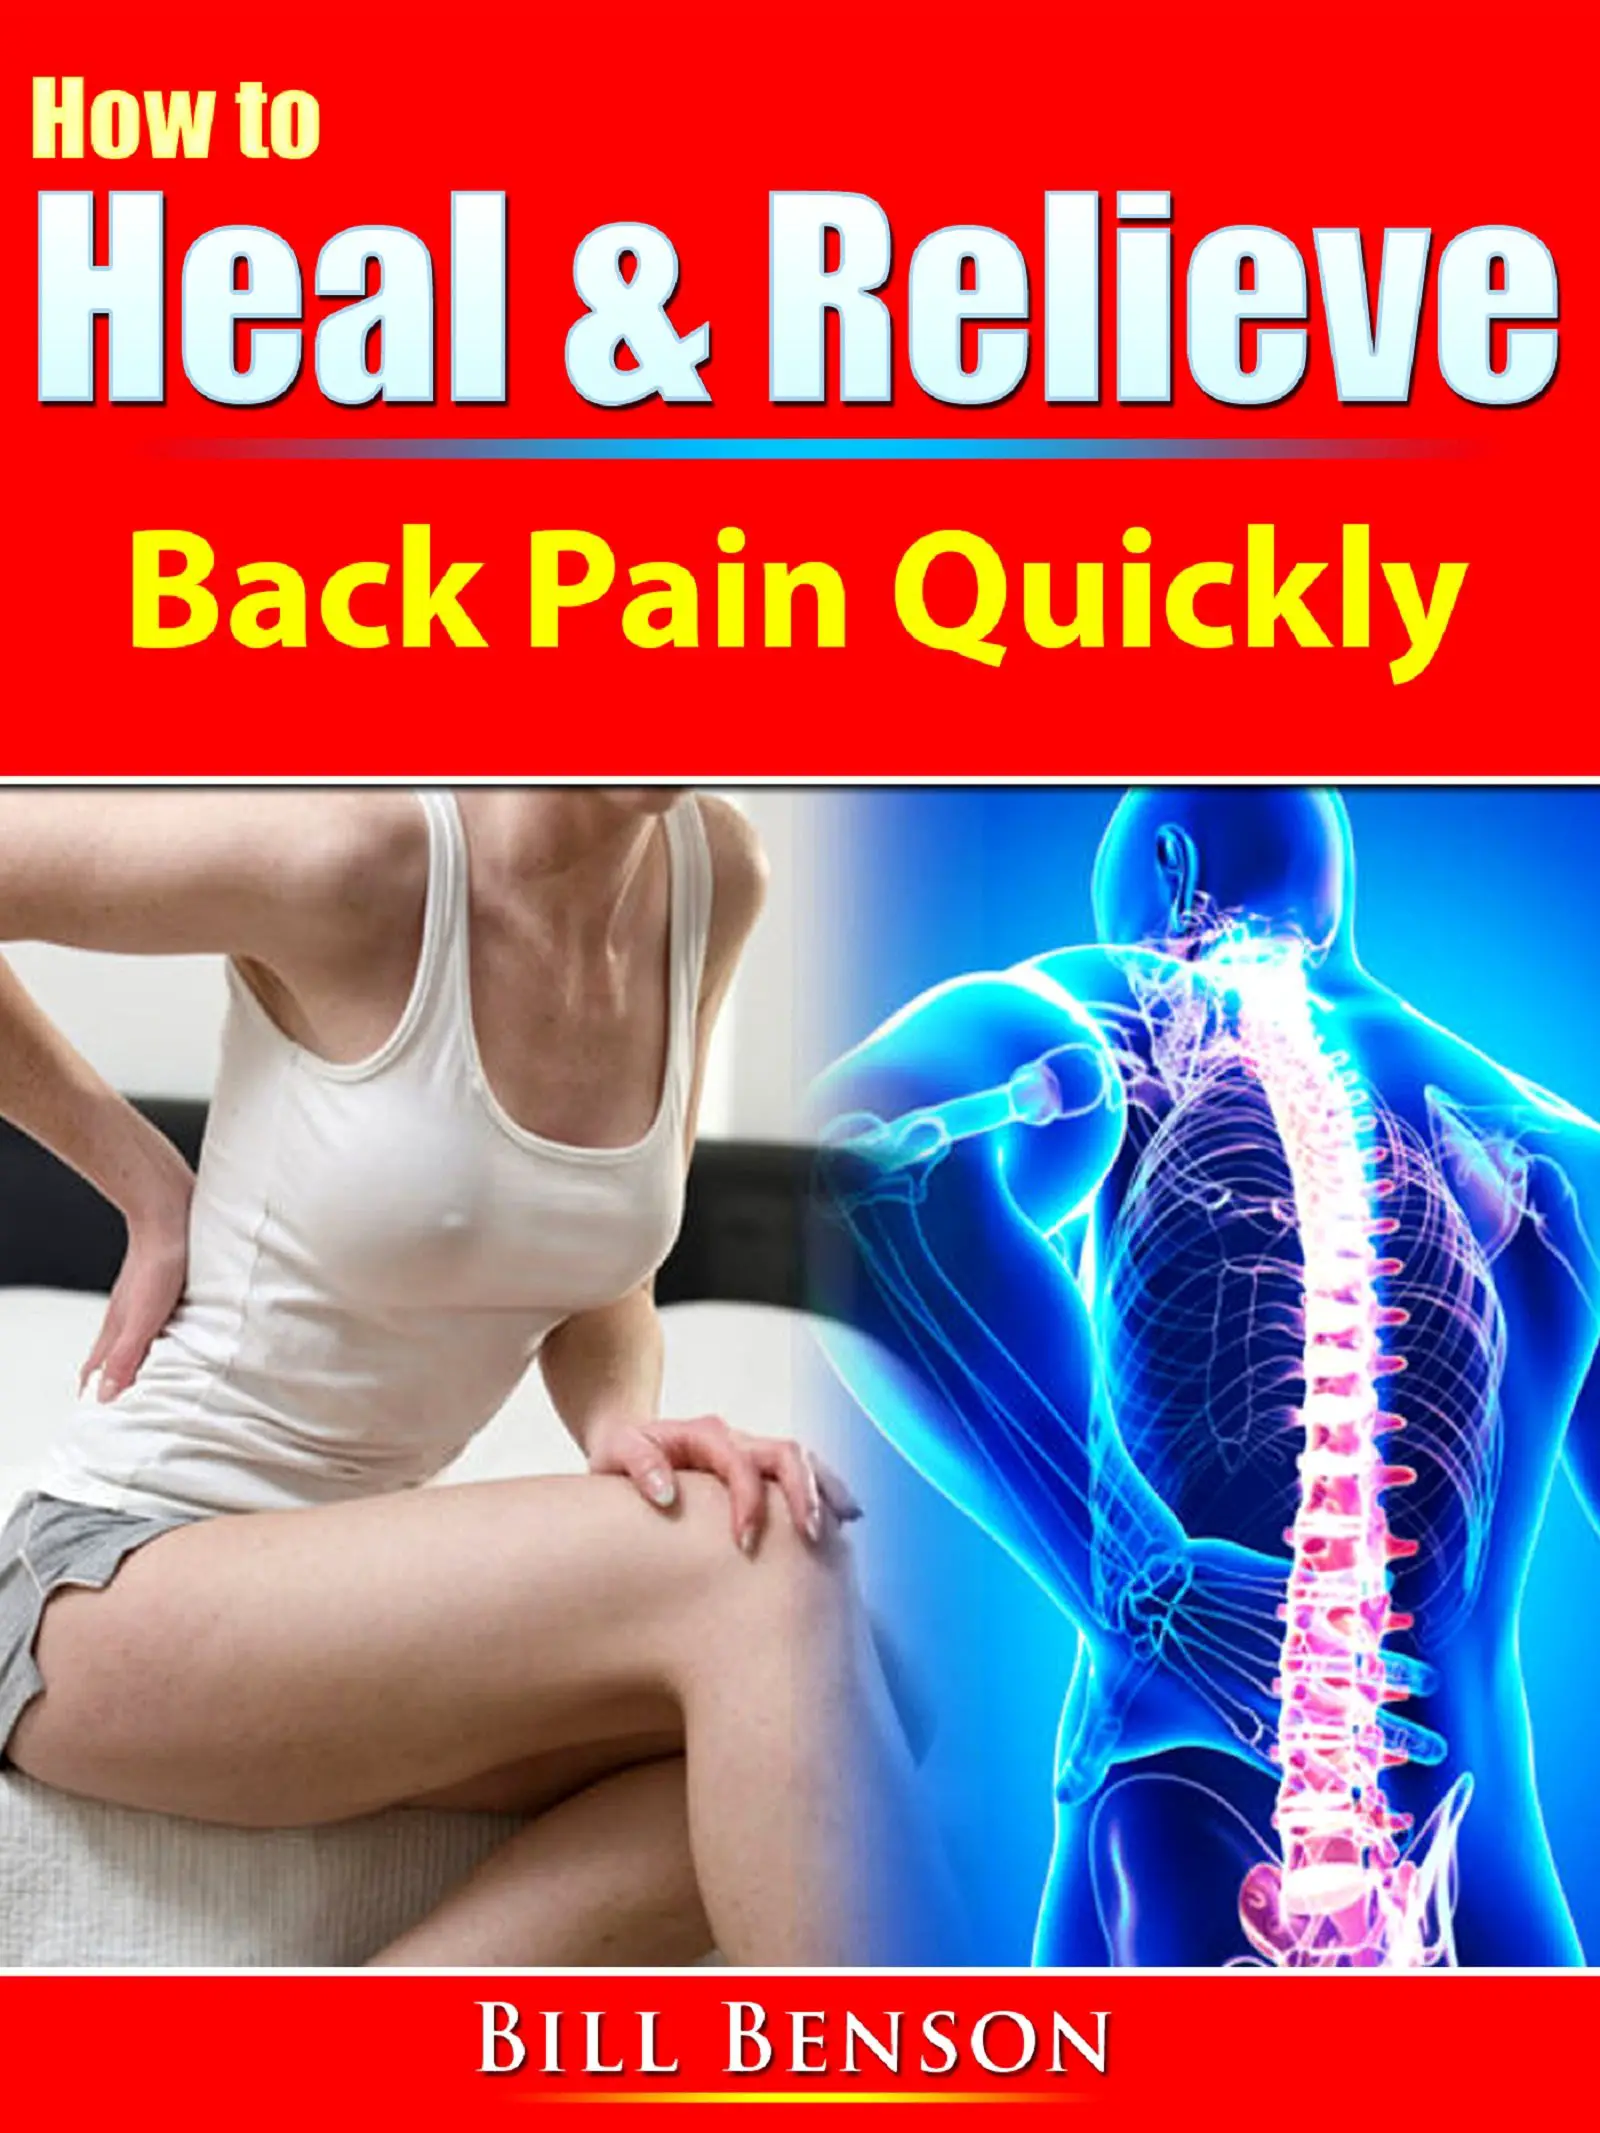 Babelcube â How to heal &  relieve back pain quickly